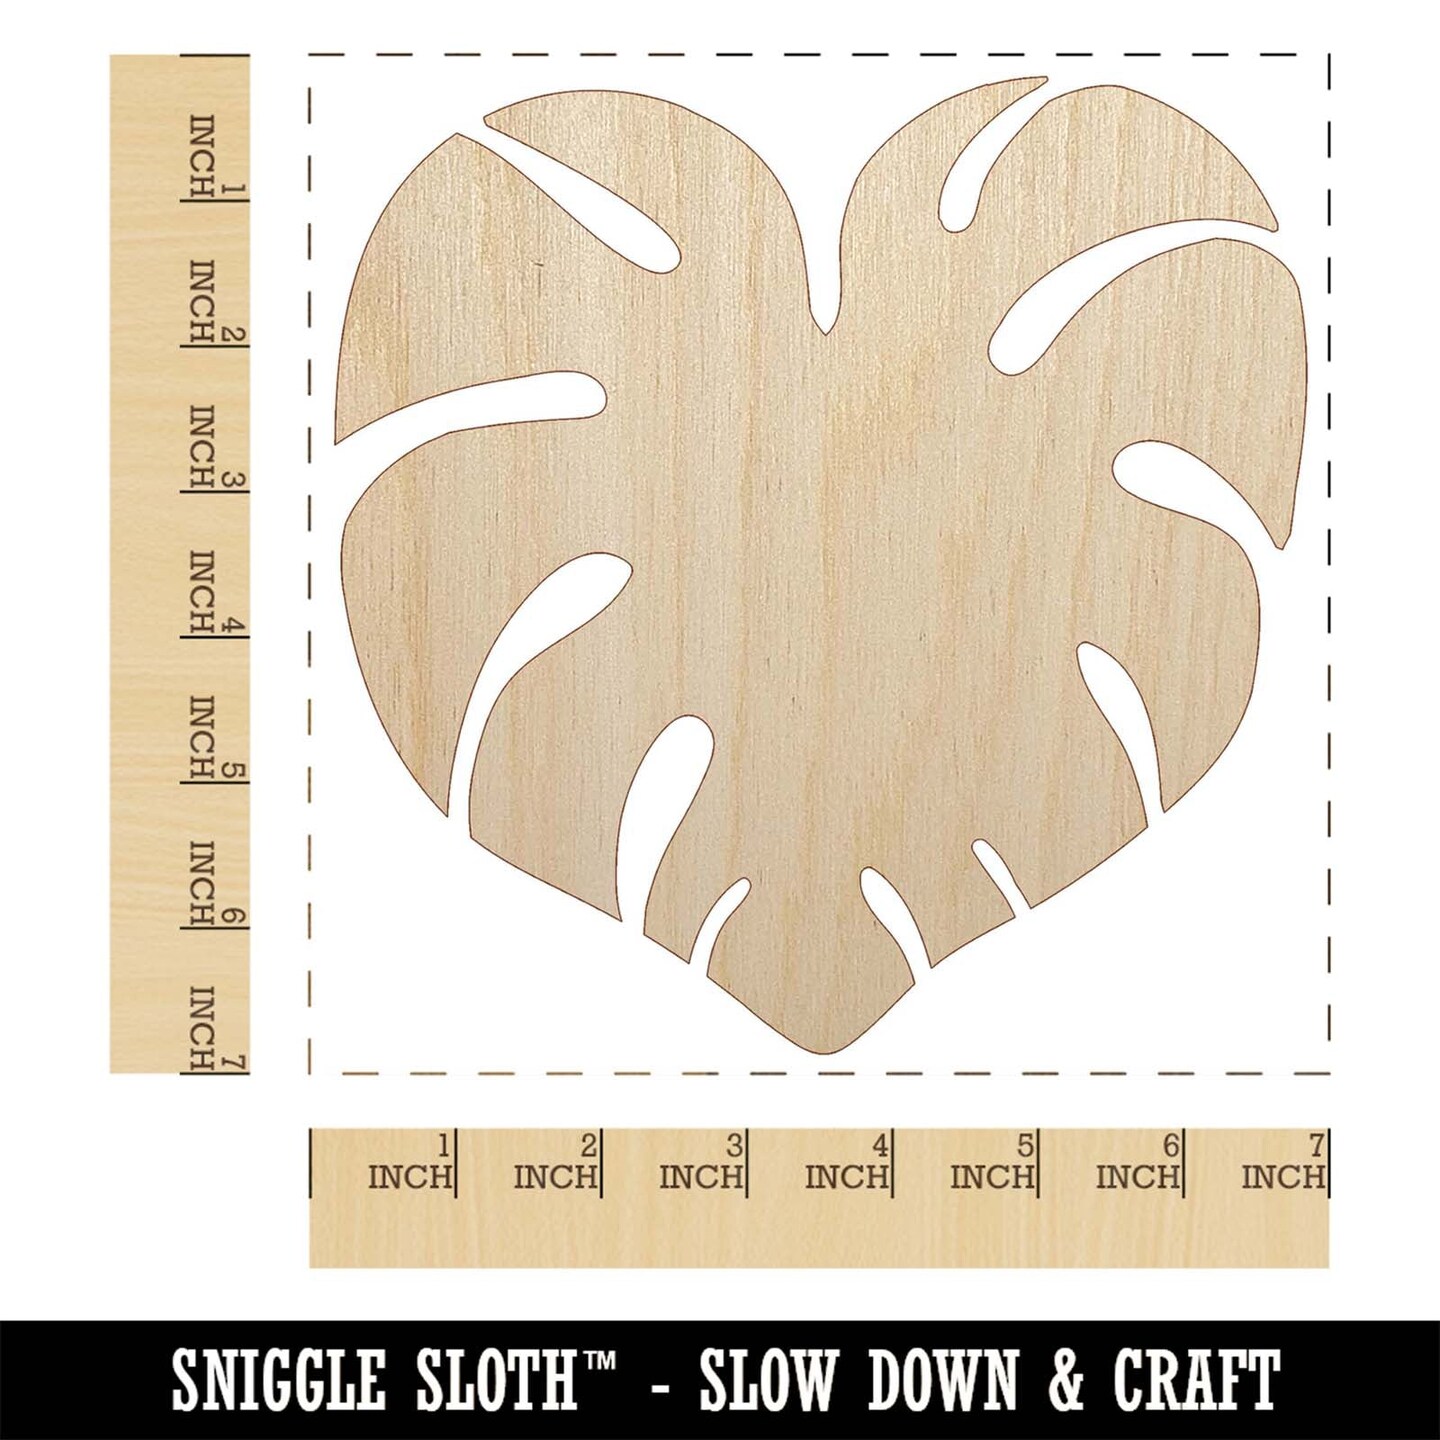 Monstera Leaf Swiss Cheese Plant Unfinished Wood Shape Piece Cutout for DIY Craft Projects